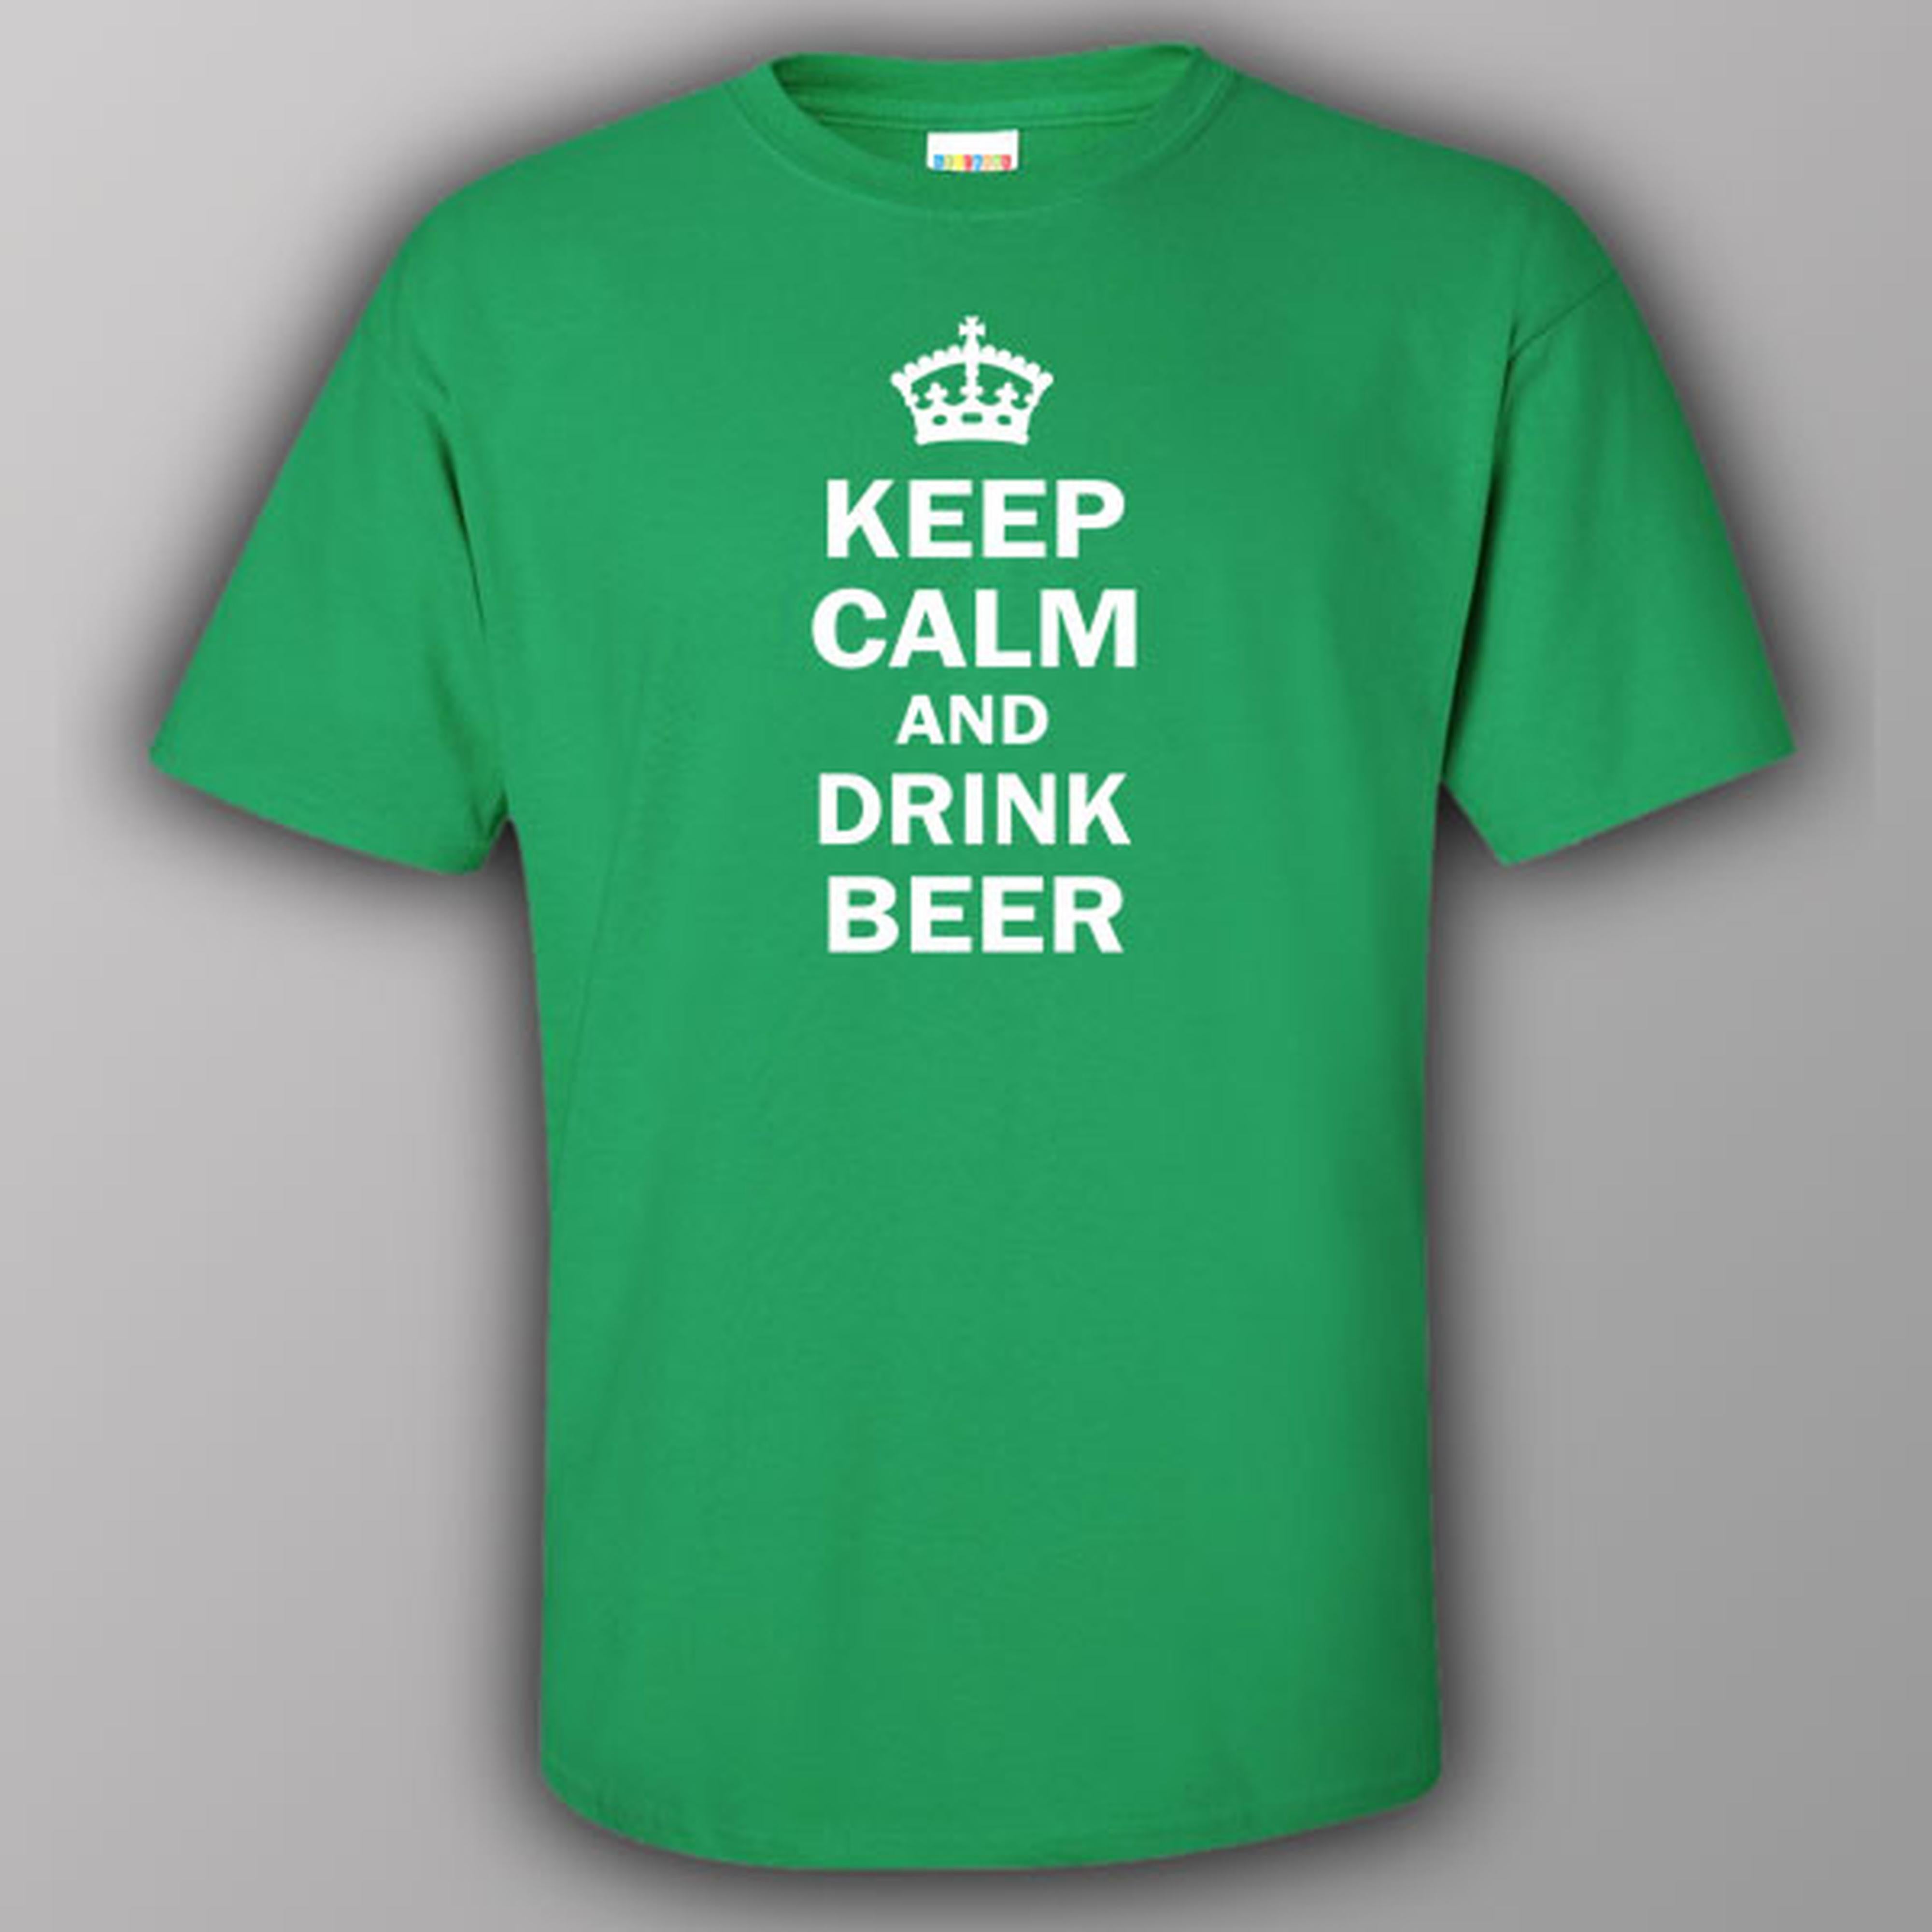 Keep calm and drink beer - T-shirt